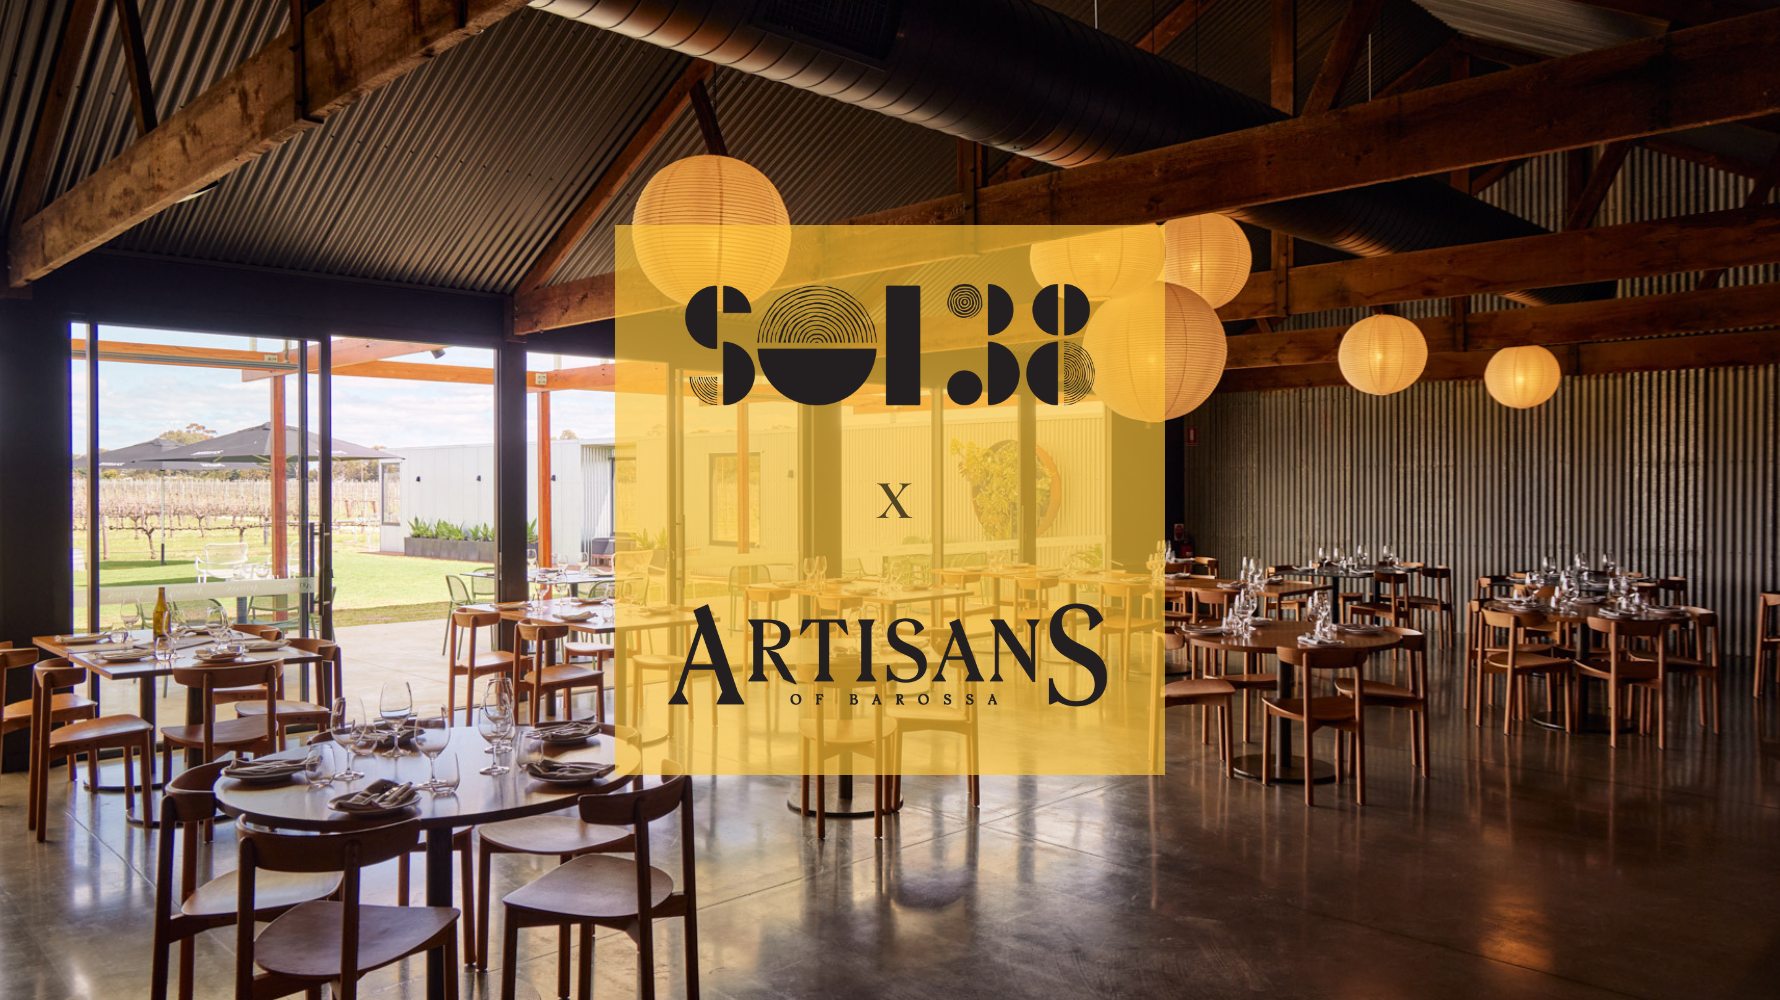 Soi 38 Joins Artisans of Barossa for an Exquisite Two-Day Culinary Pop-Up